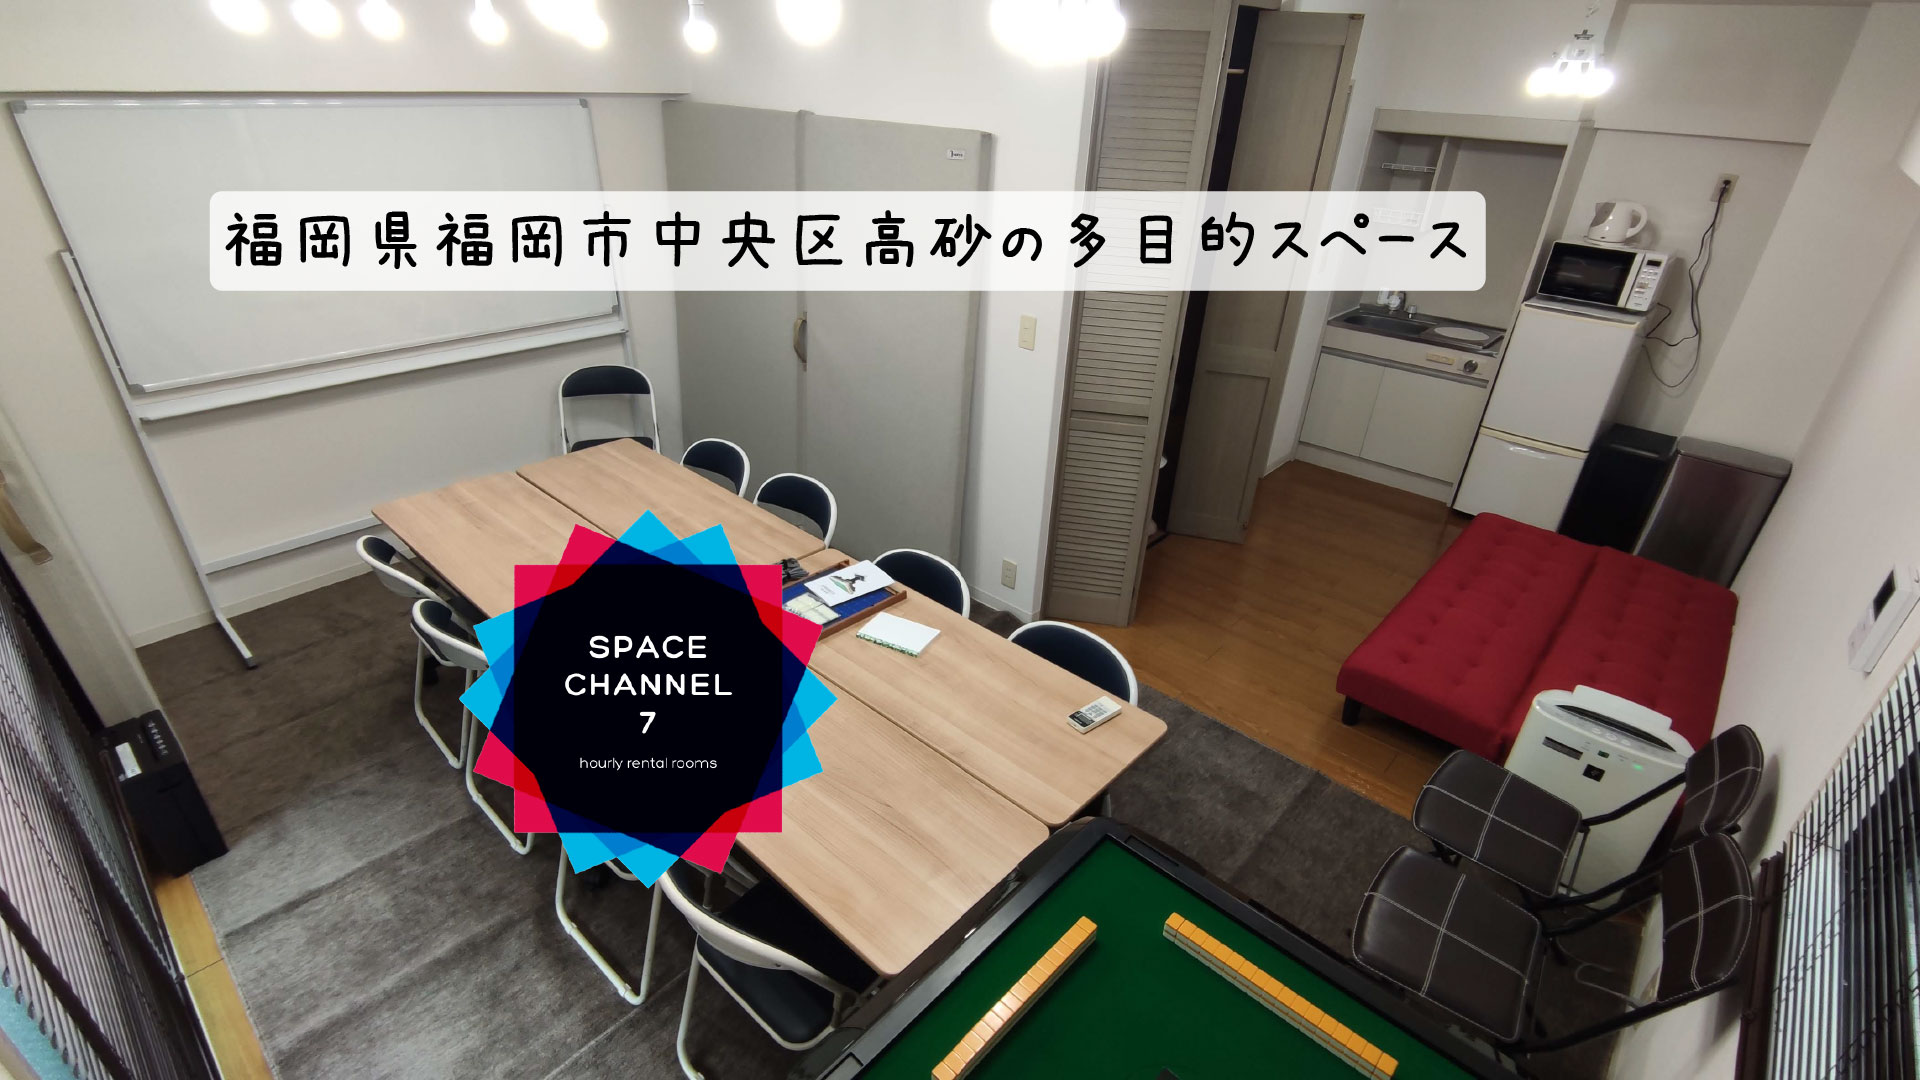 space_image